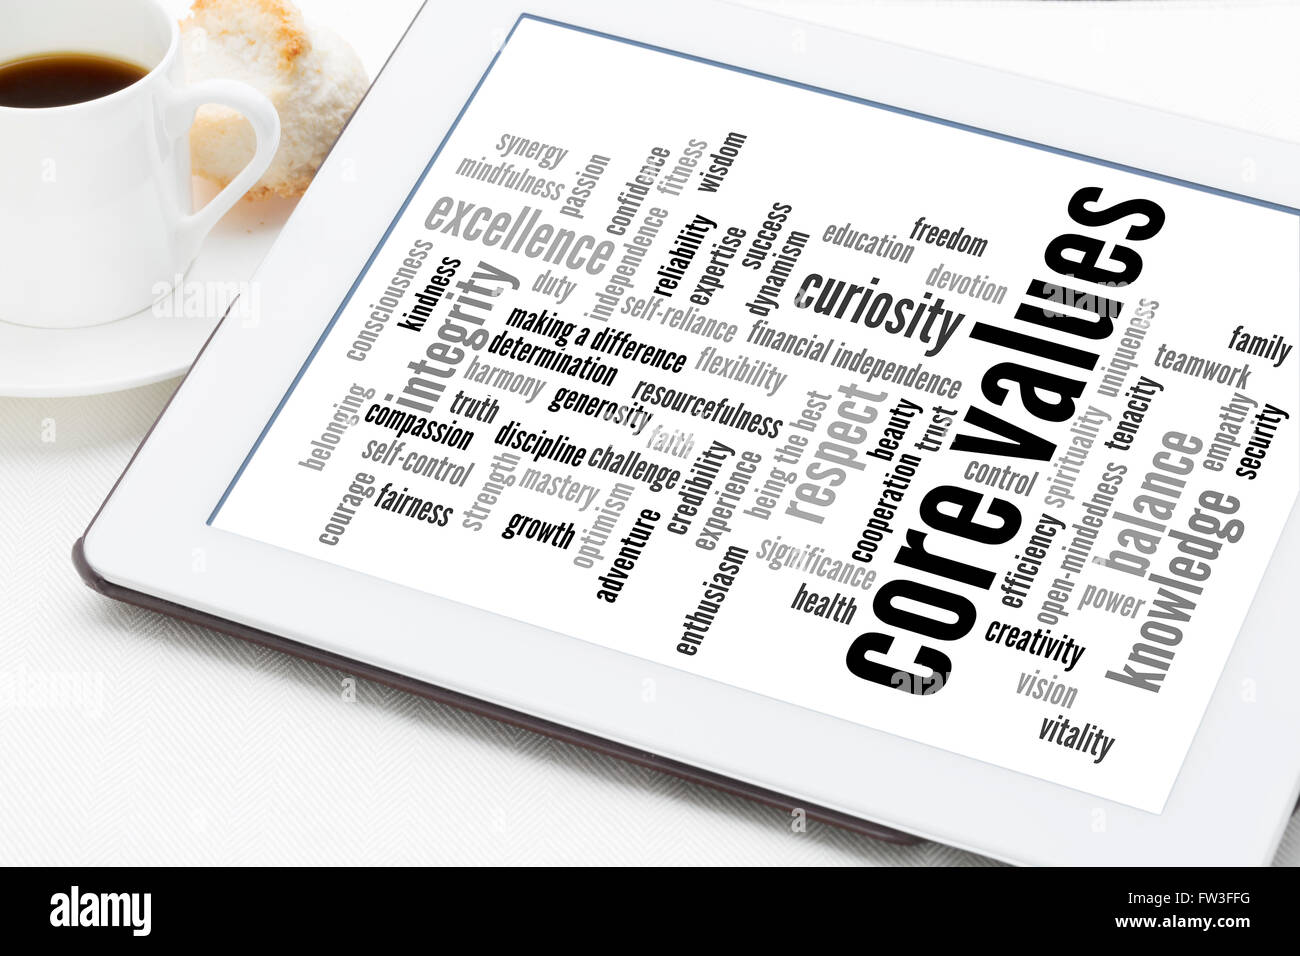 word cloud of possible core values on a digital tablet with a cup of coffee Stock Photo